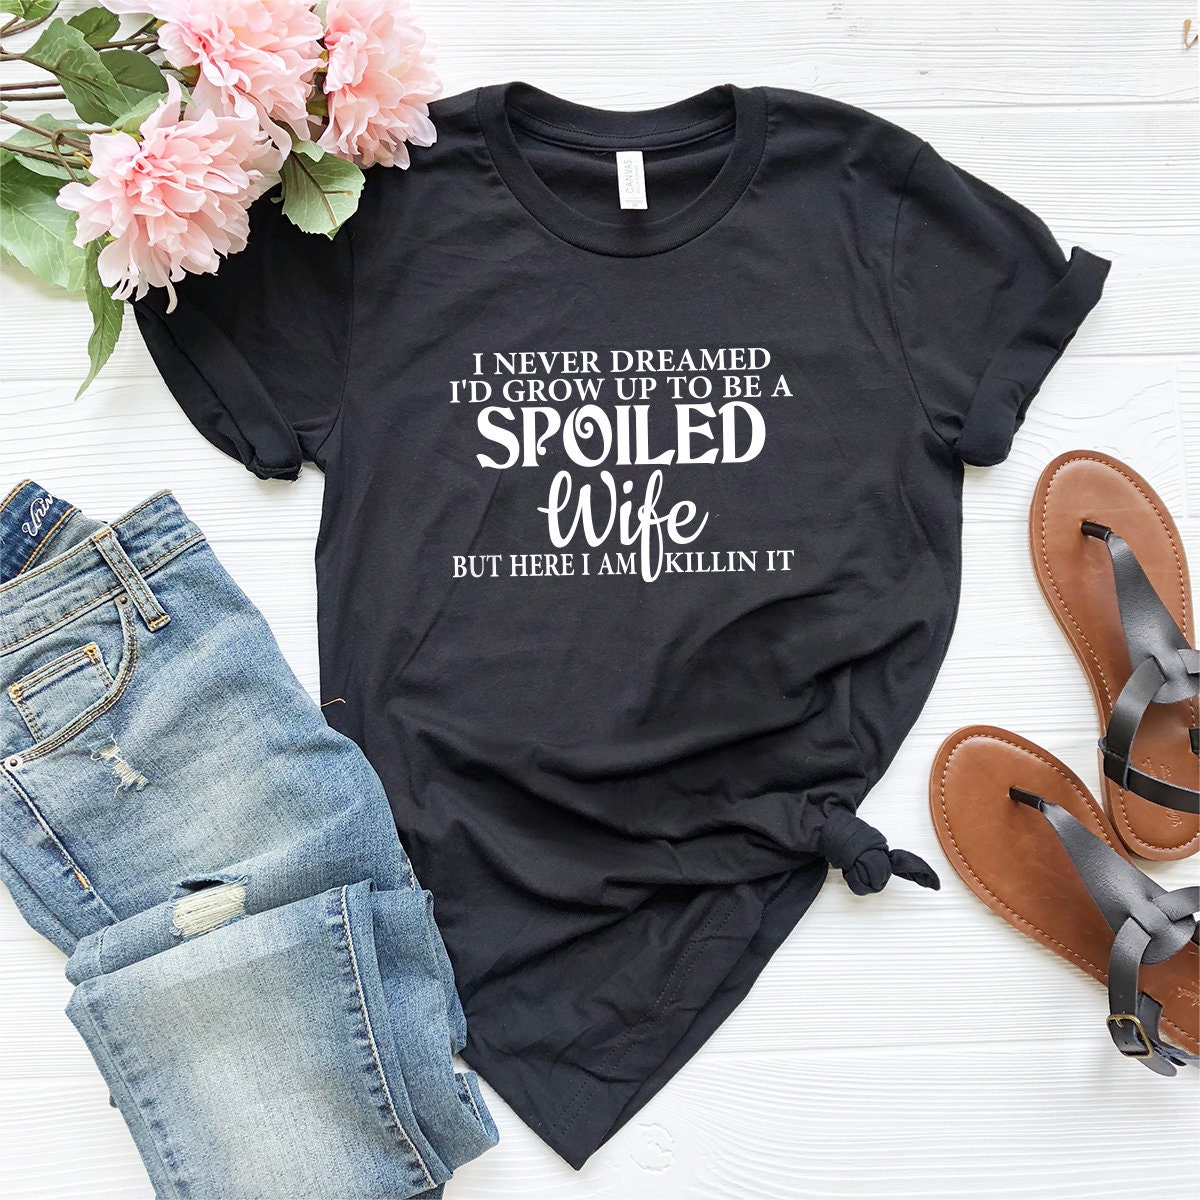 Funny Wife Shirt, I Never Dreamed I'd Grow Up To Be A Spoiled Wife Shirt, Spoiled Wife Tshirt, Gift For Wife, Best Wife Gift - Fastdeliverytees.com